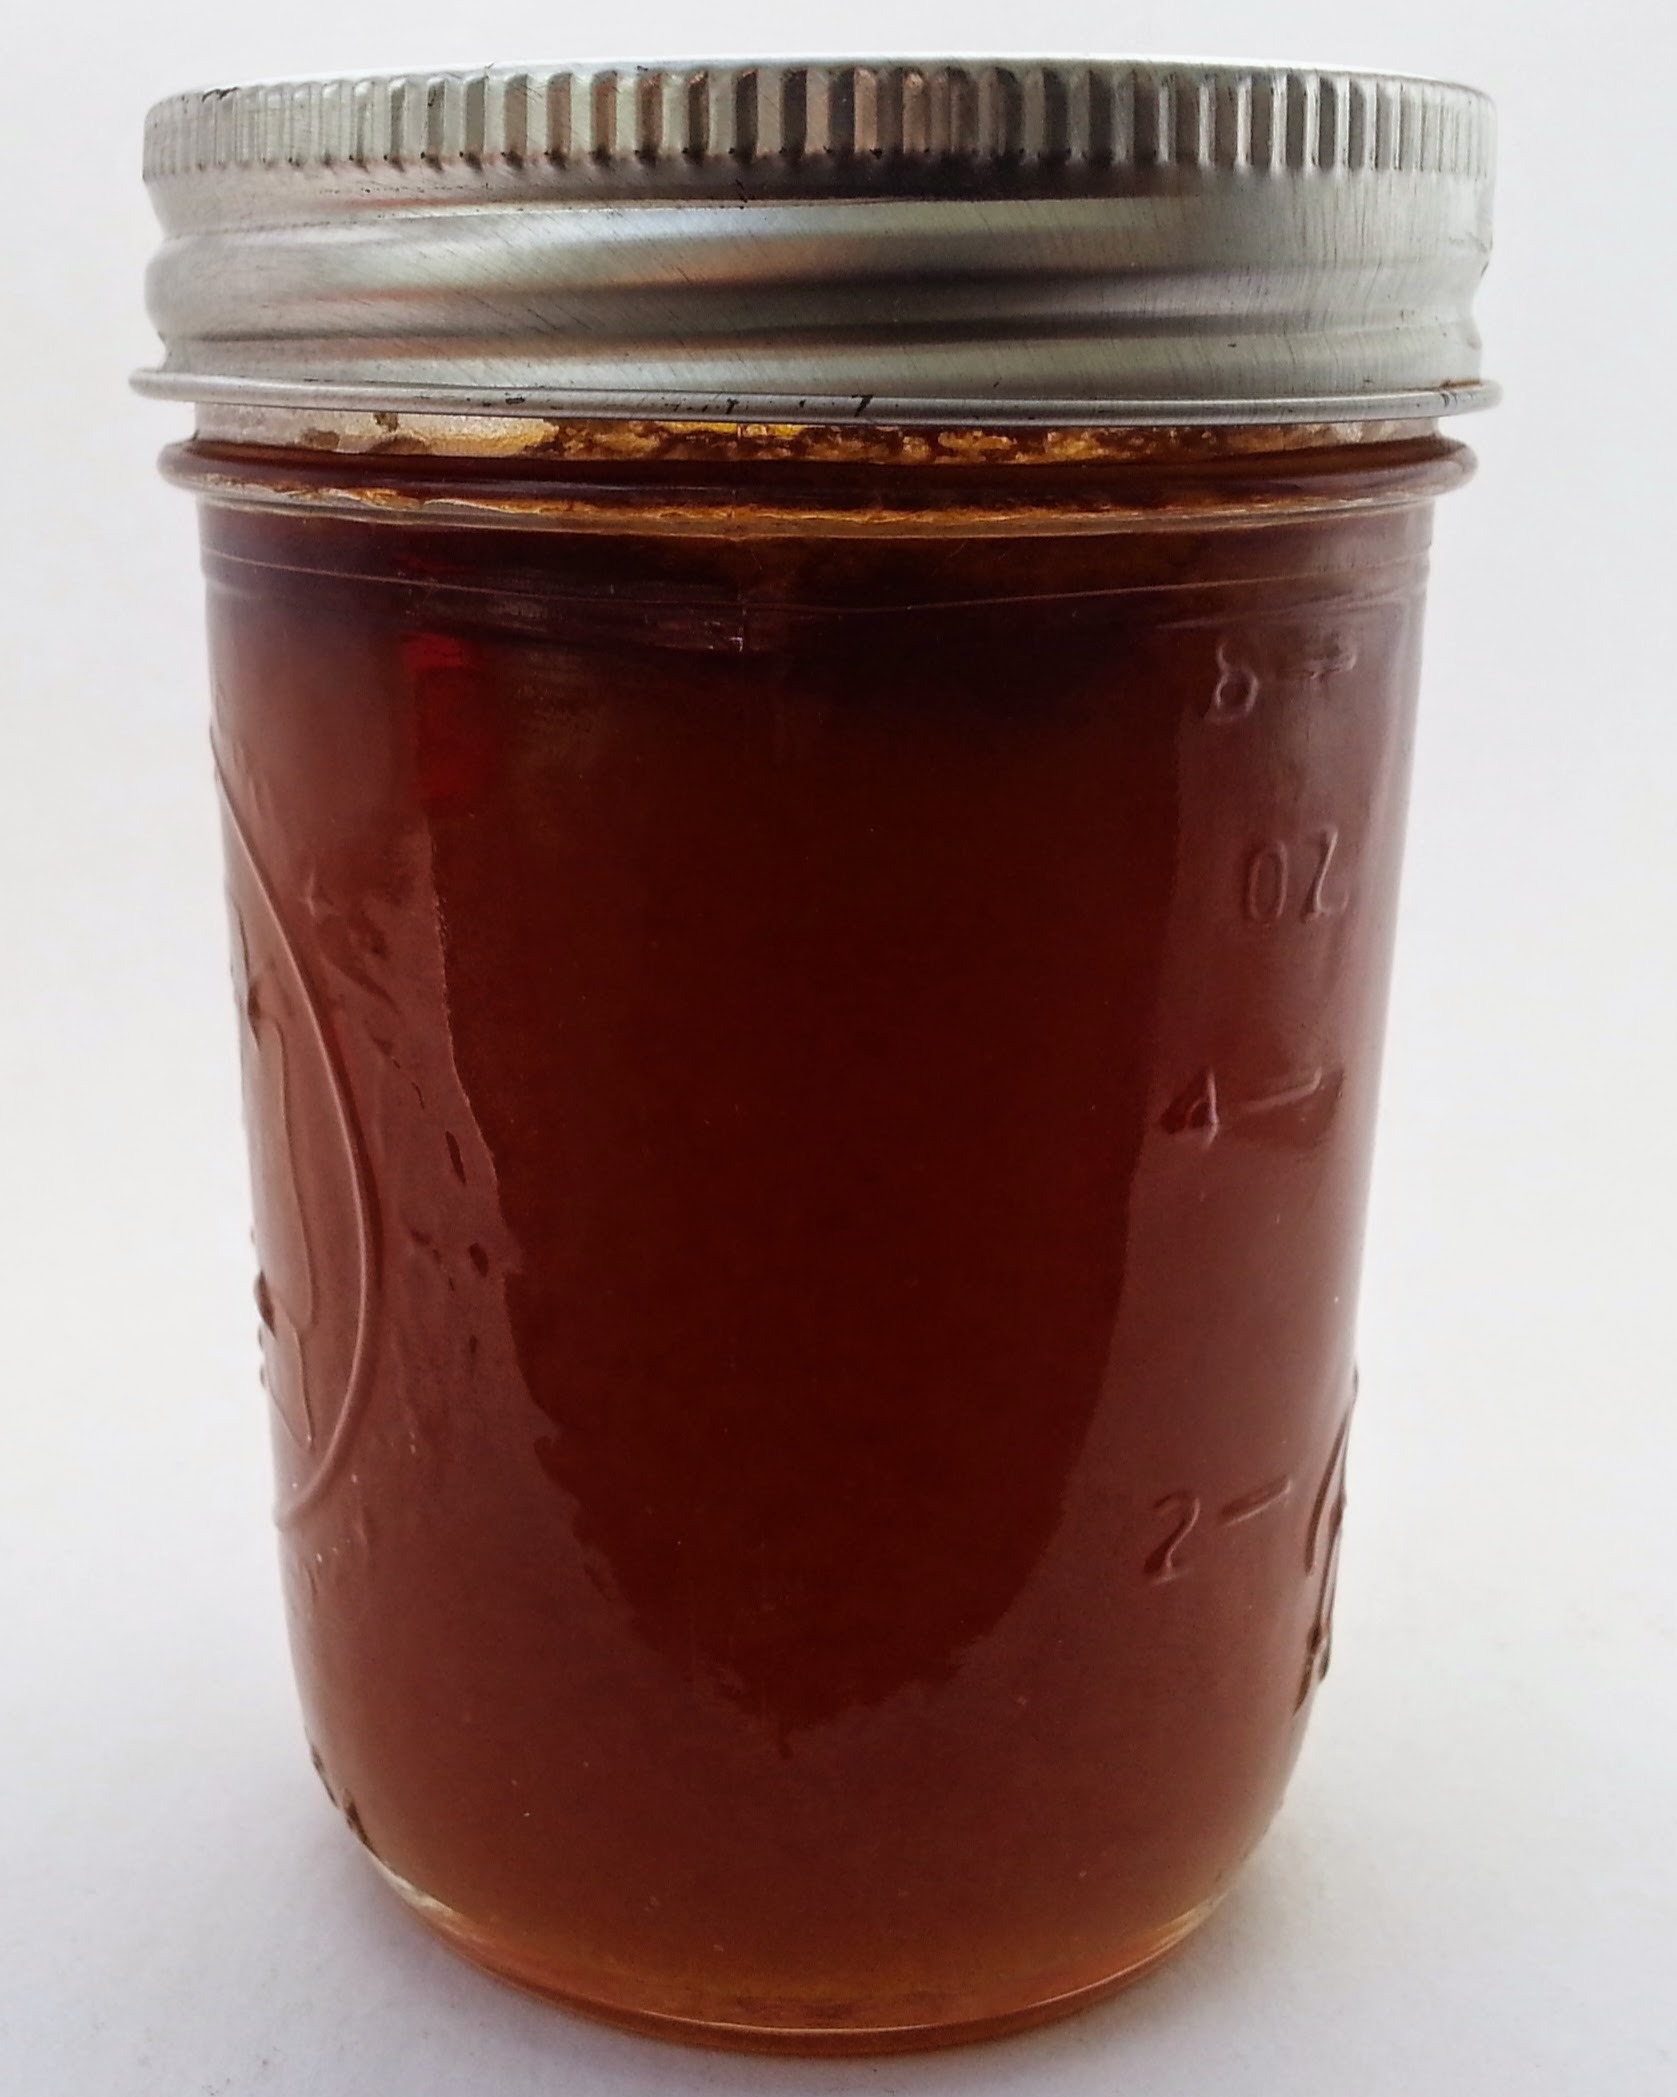 BZ Honey - Whether you re-liquefy it, or spread it on toast, this crystallized honey won't ever go bad.